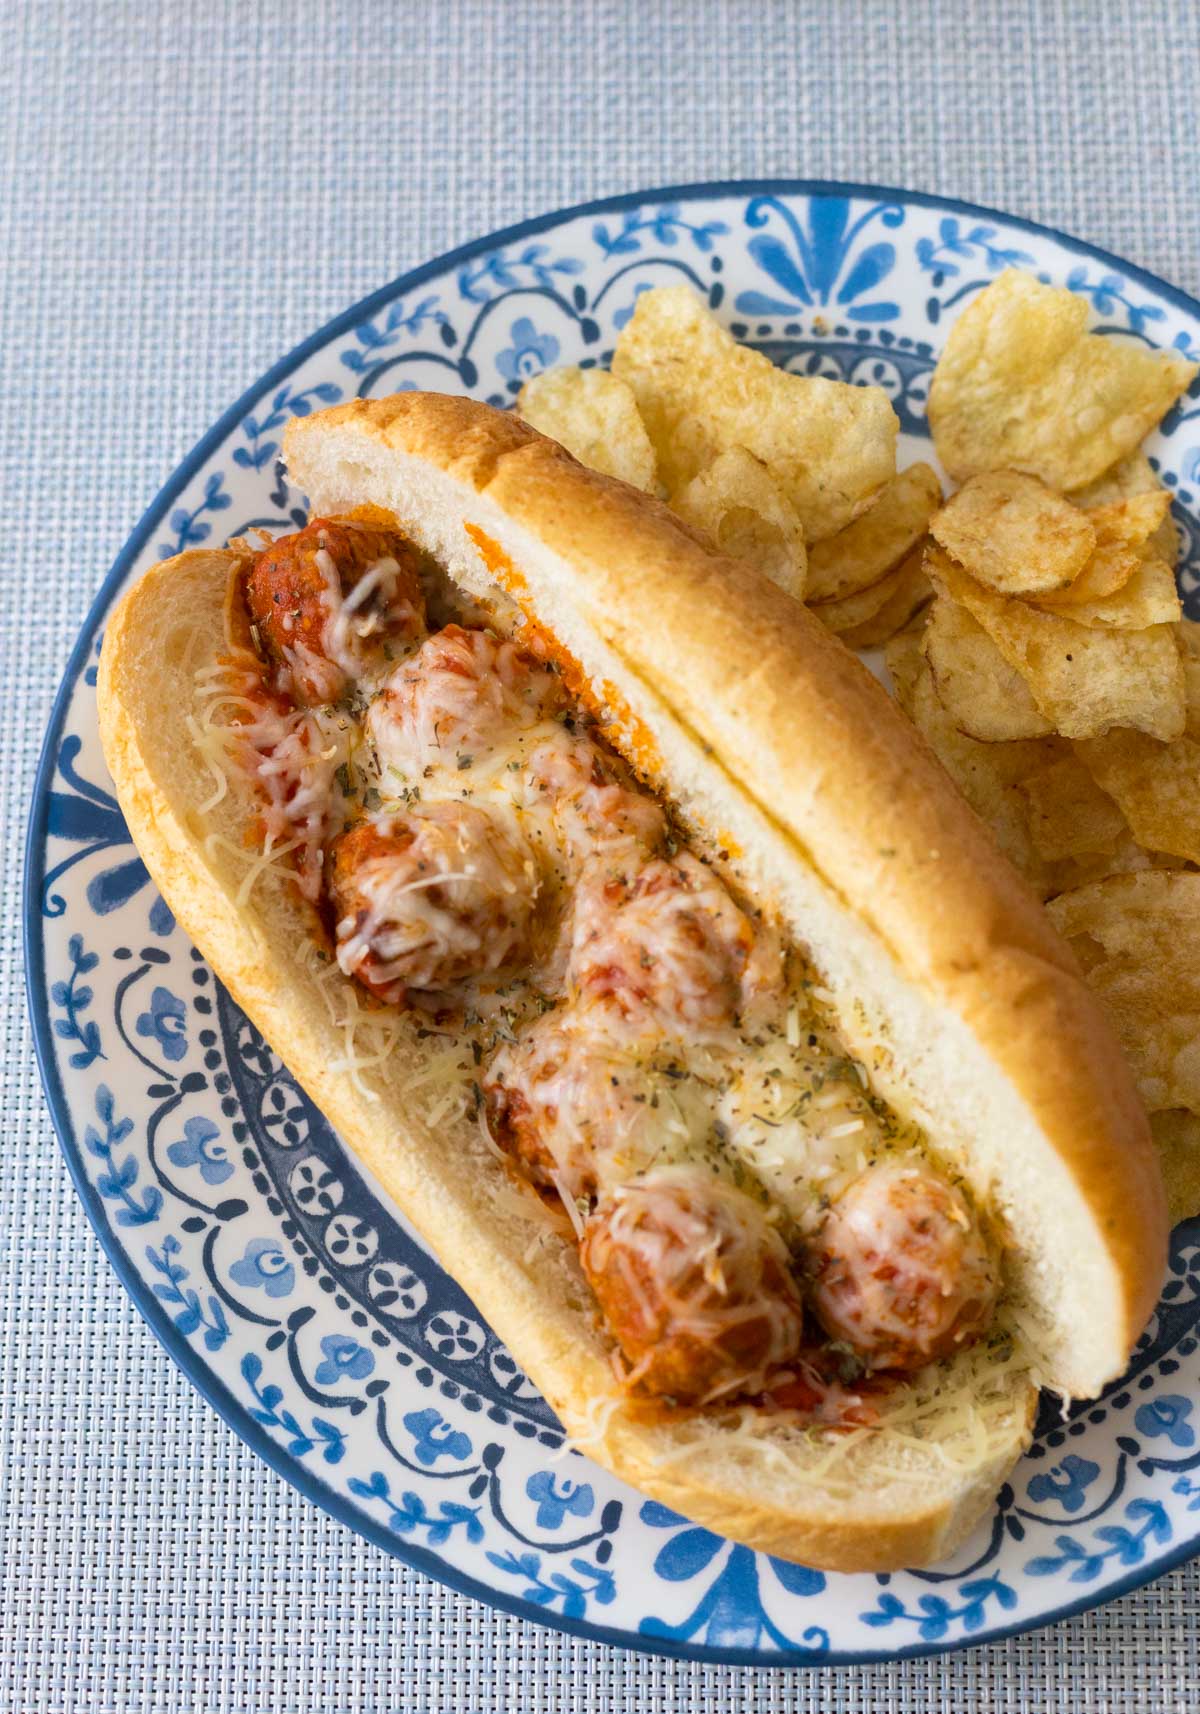 The baked meatball sub is on a blue plate next to some potato chips.